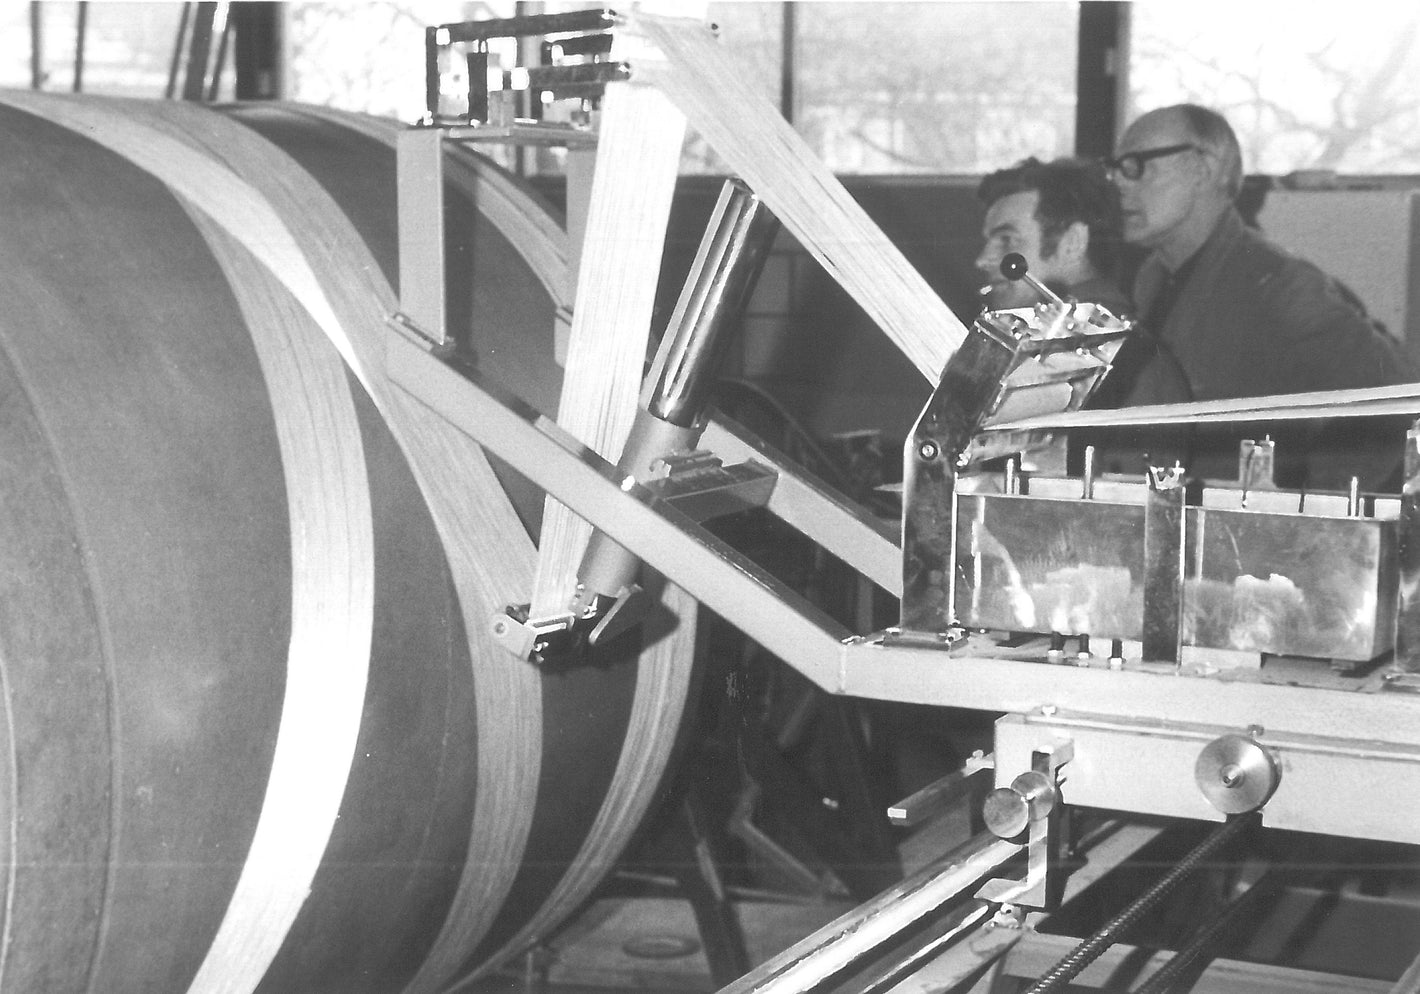 A black and white photo of filament winding when the technology was quite new